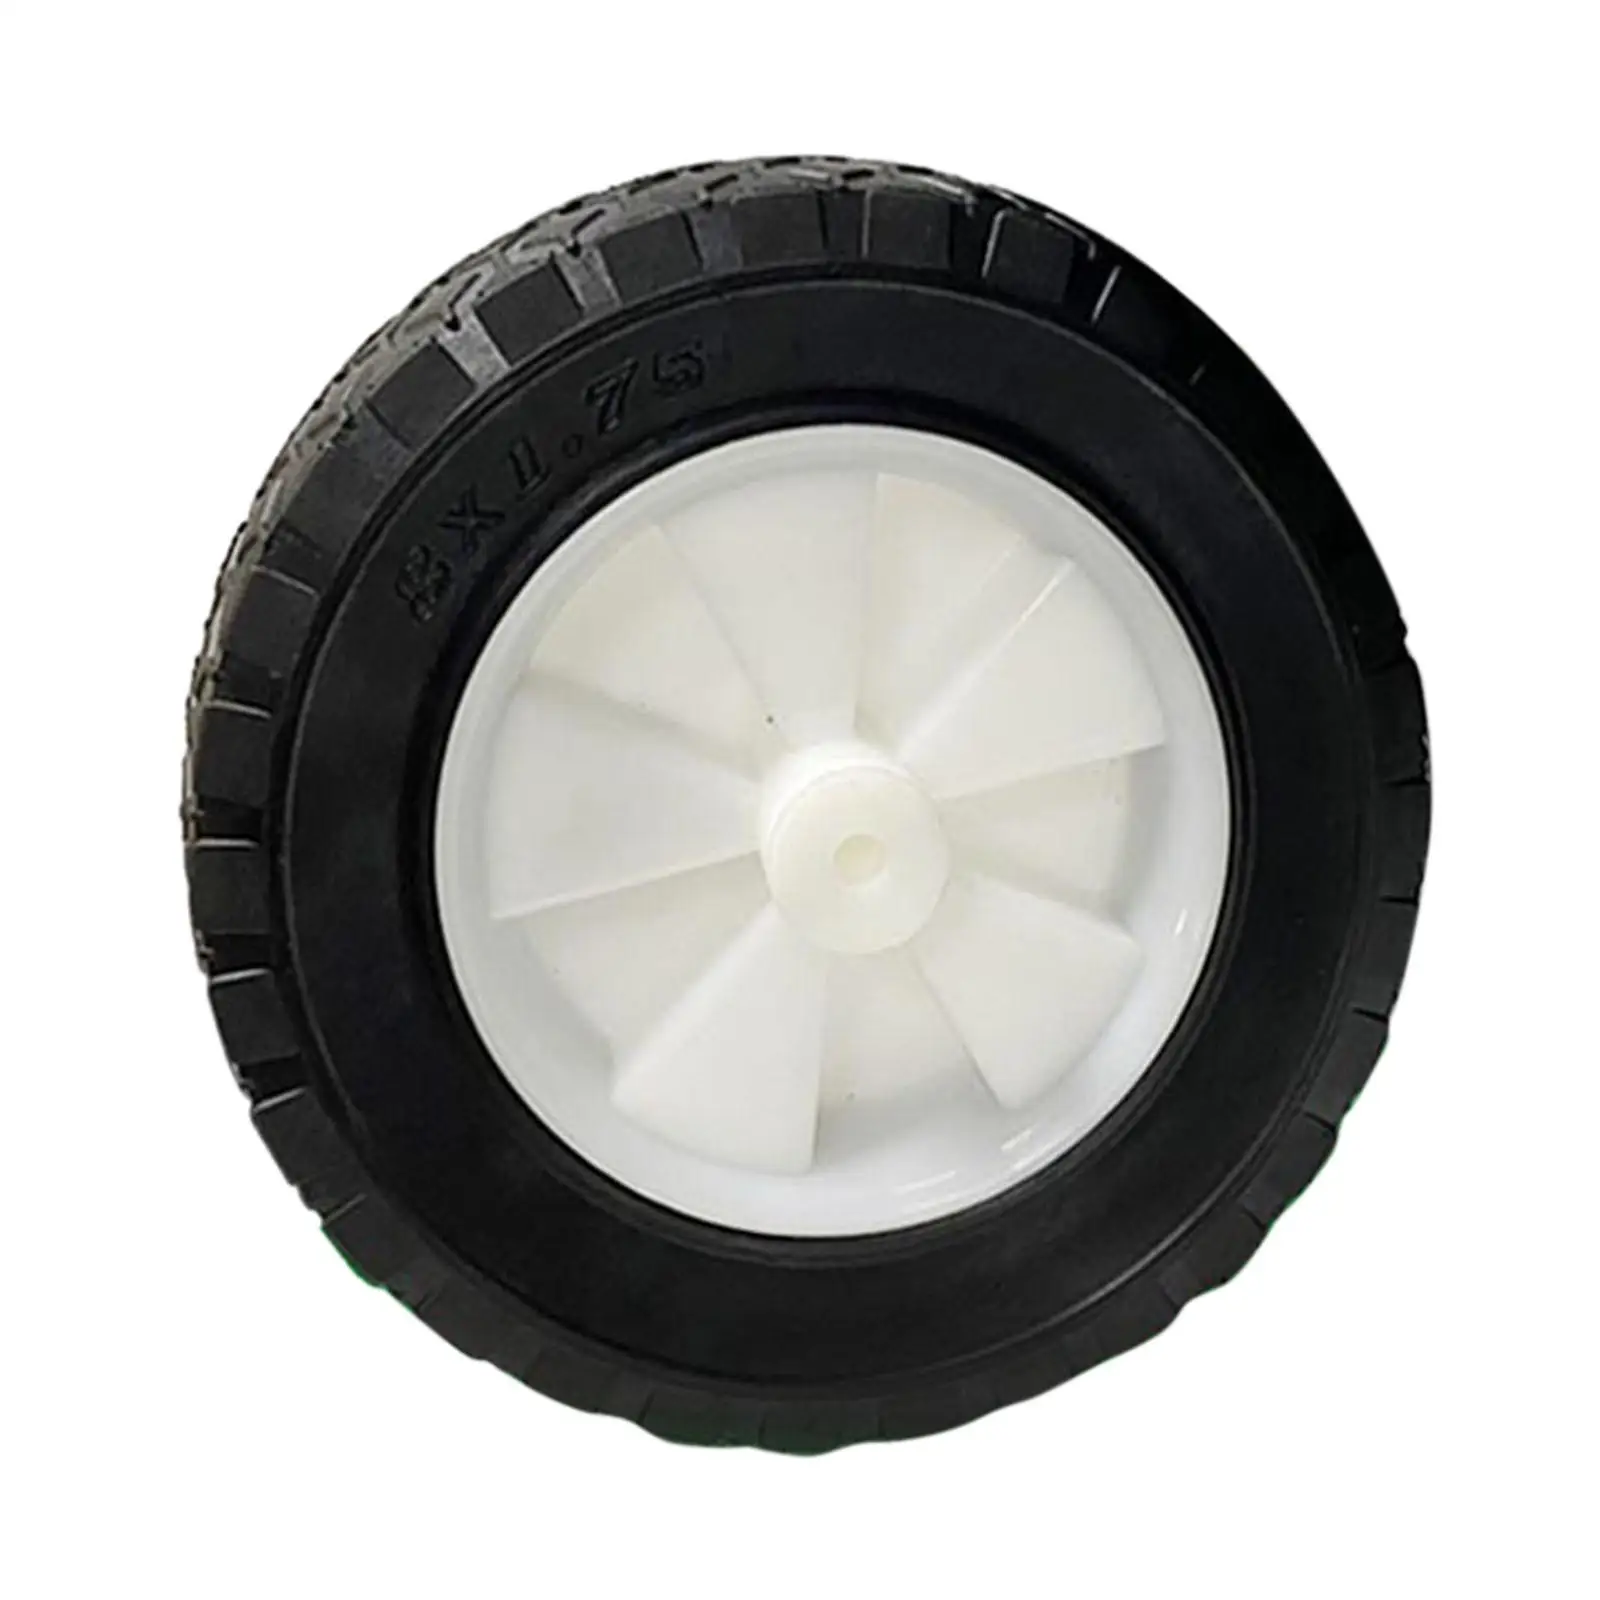 8 inch Wheelbarrow Tire Replacement Wheel Tyres Large Load Capacity Puncture Resistant for Wagon Garden Generator Outdoor Mower